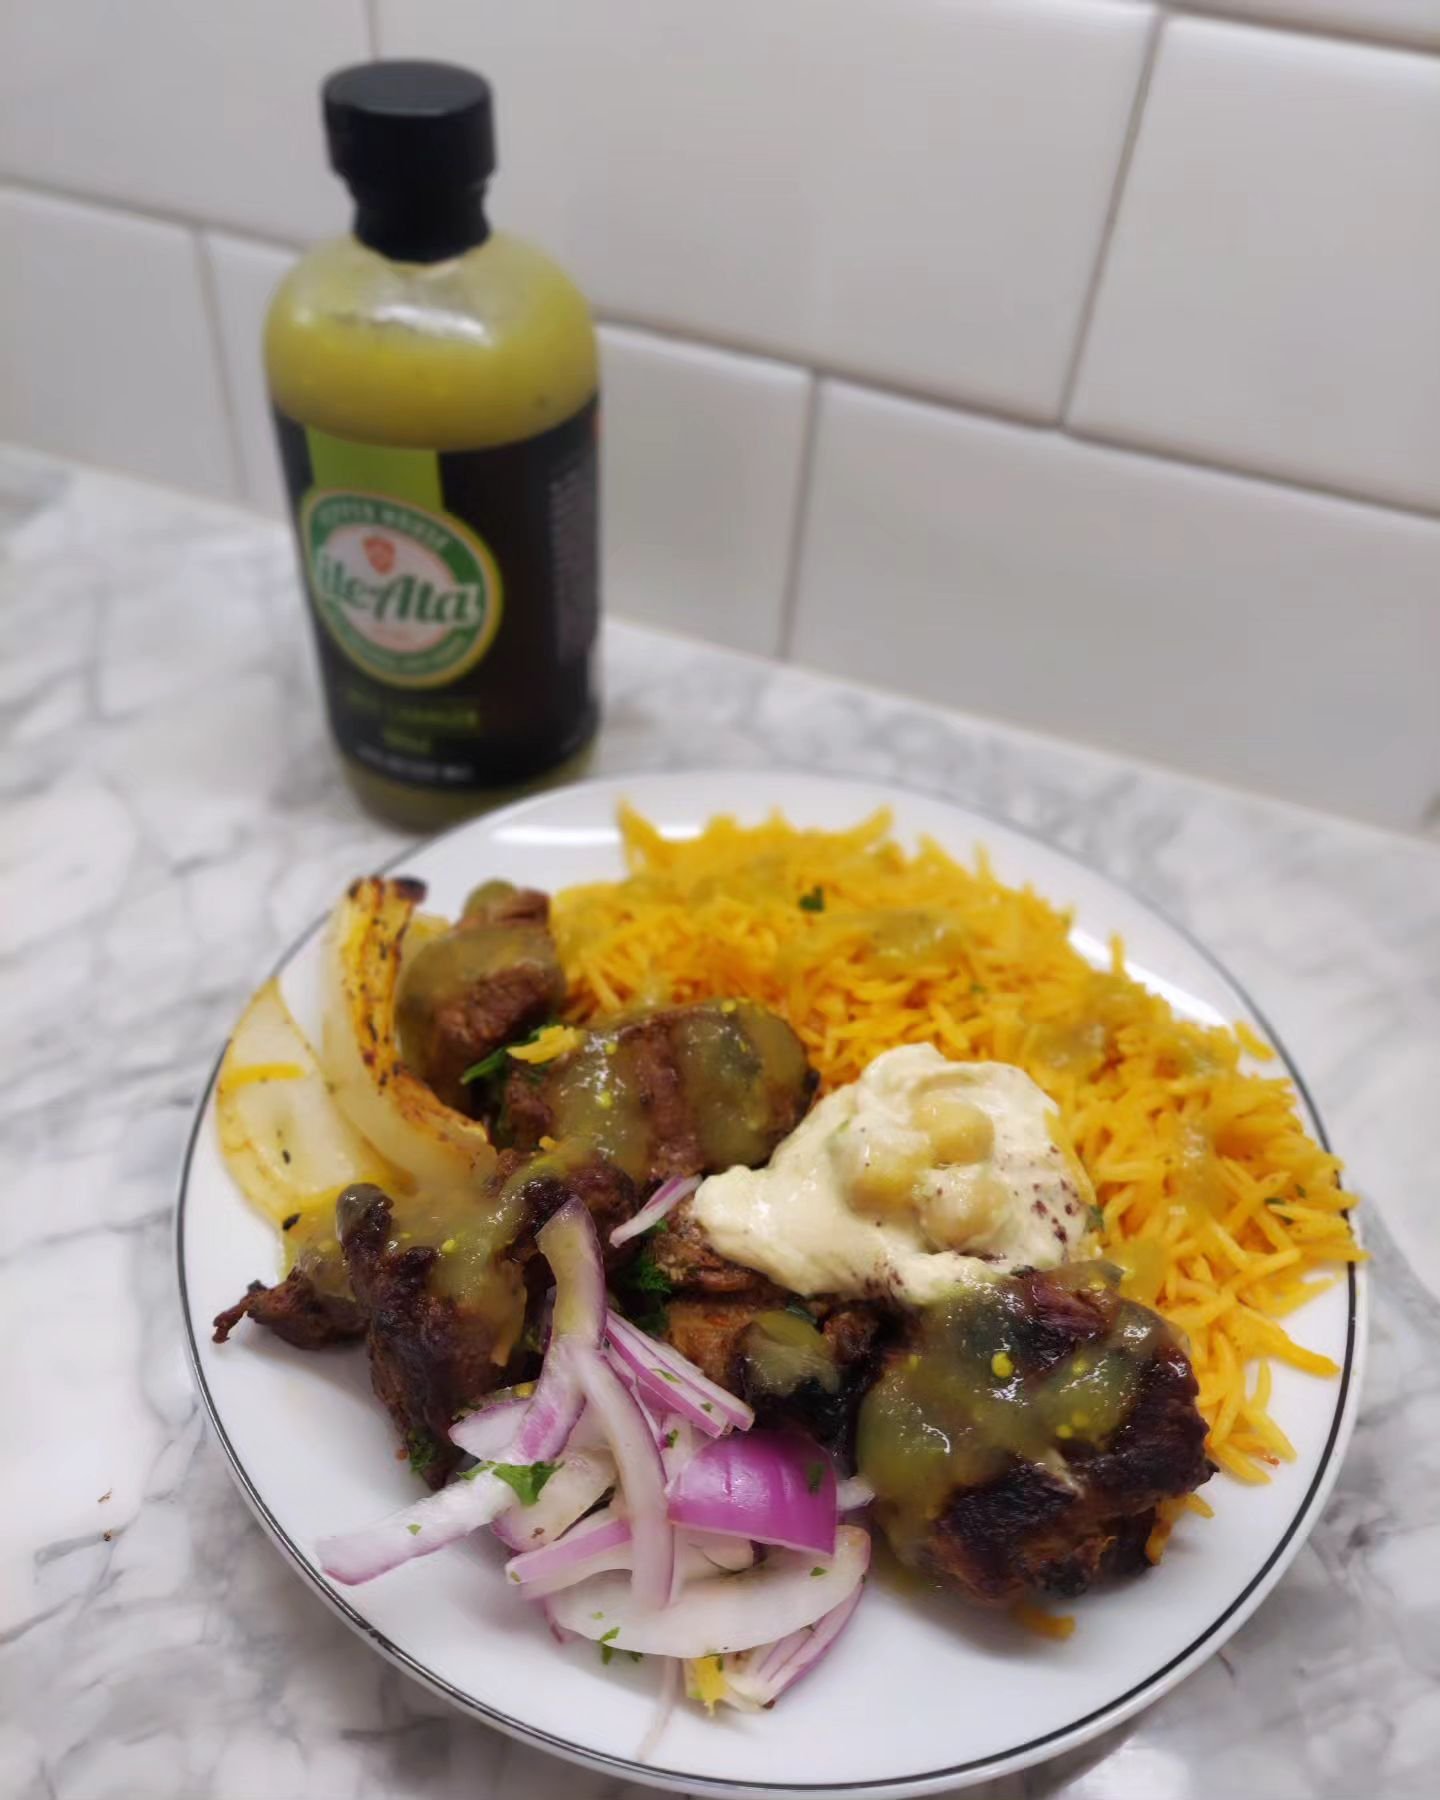 Our green sauce is a mild heat with tons of flavor. Goes great with beef kabobs! 🔥
#GreenHotSauce #Serrano #Serranos #SerranoPepper #SerranoPeppers #MildSauce #MildHotSauce #BeefKabob #BeefKabobs #SmallBatchHotSauce #CraftHotSauce